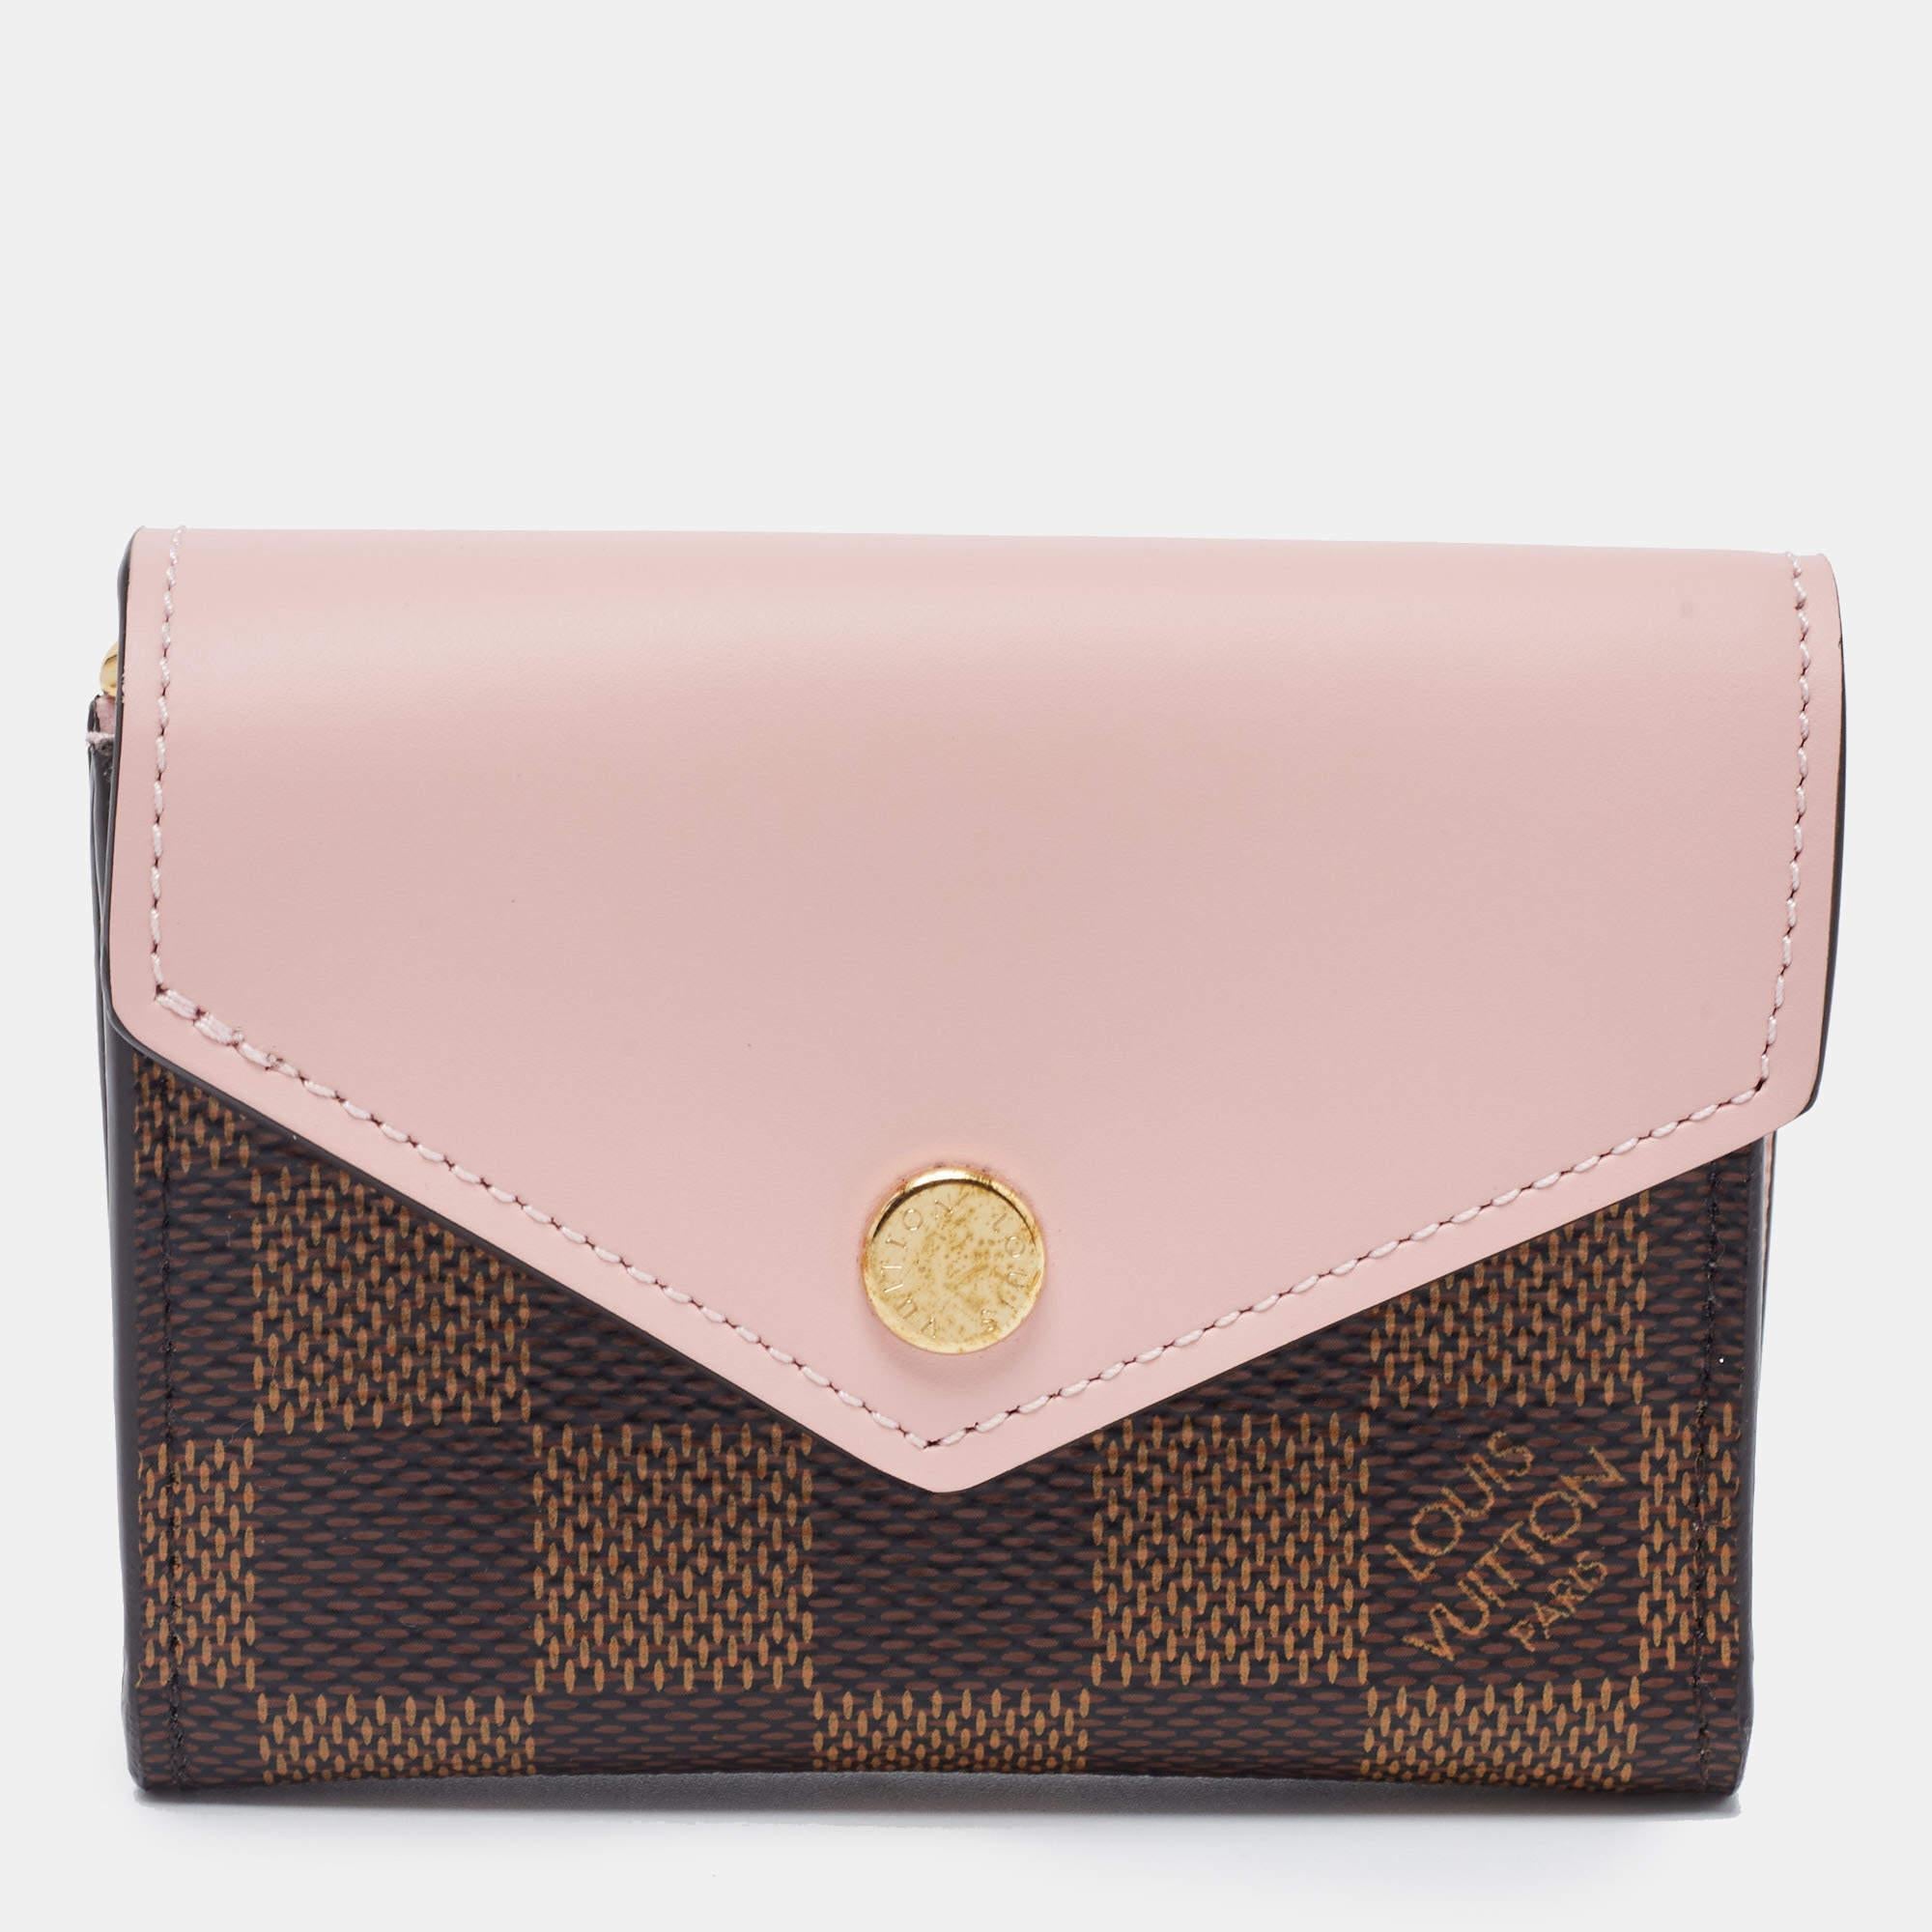 This Louis Vuitton wallet is an immaculate balance of sophistication and rational utility. It has been designed using prime quality materials and elevated by a sleek finish. The creation is equipped with ample space for your monetary